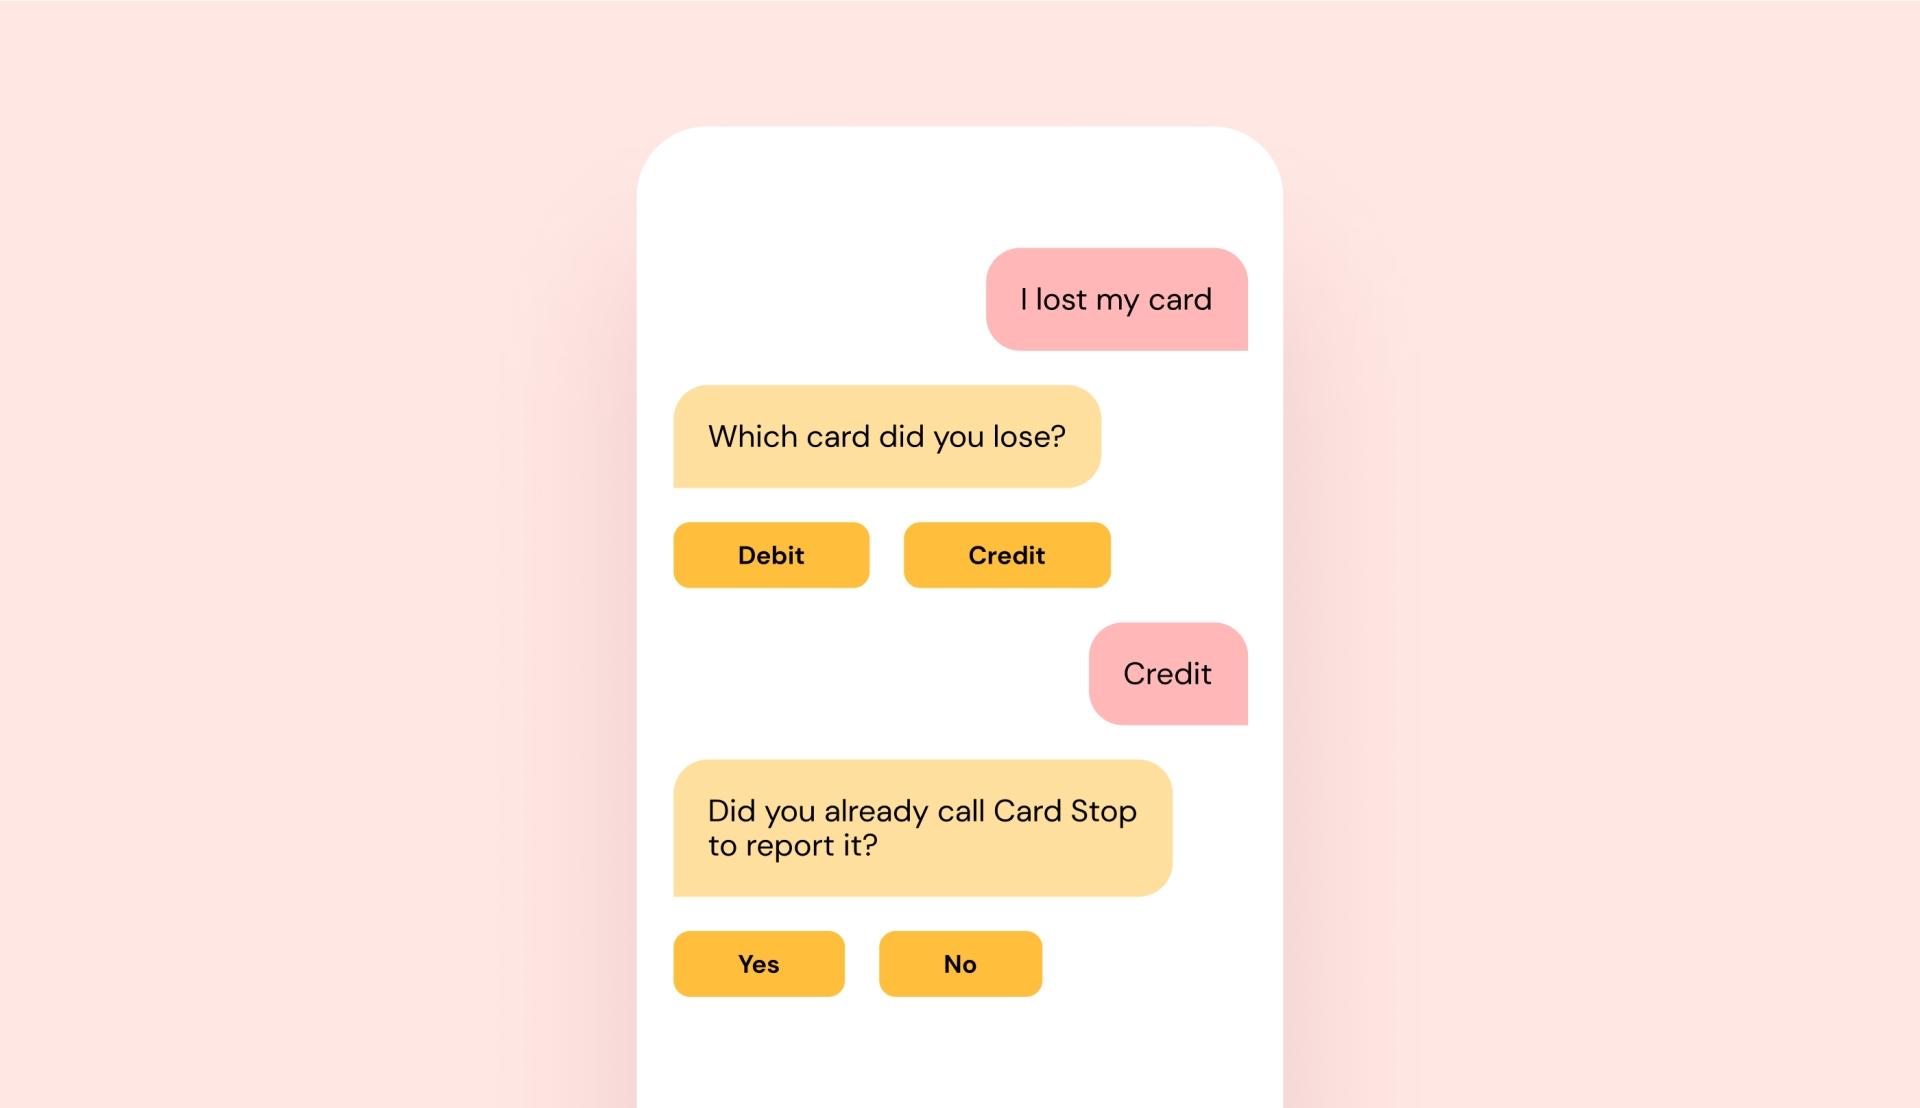 Image showing a phone screen conversation about losing a credit card